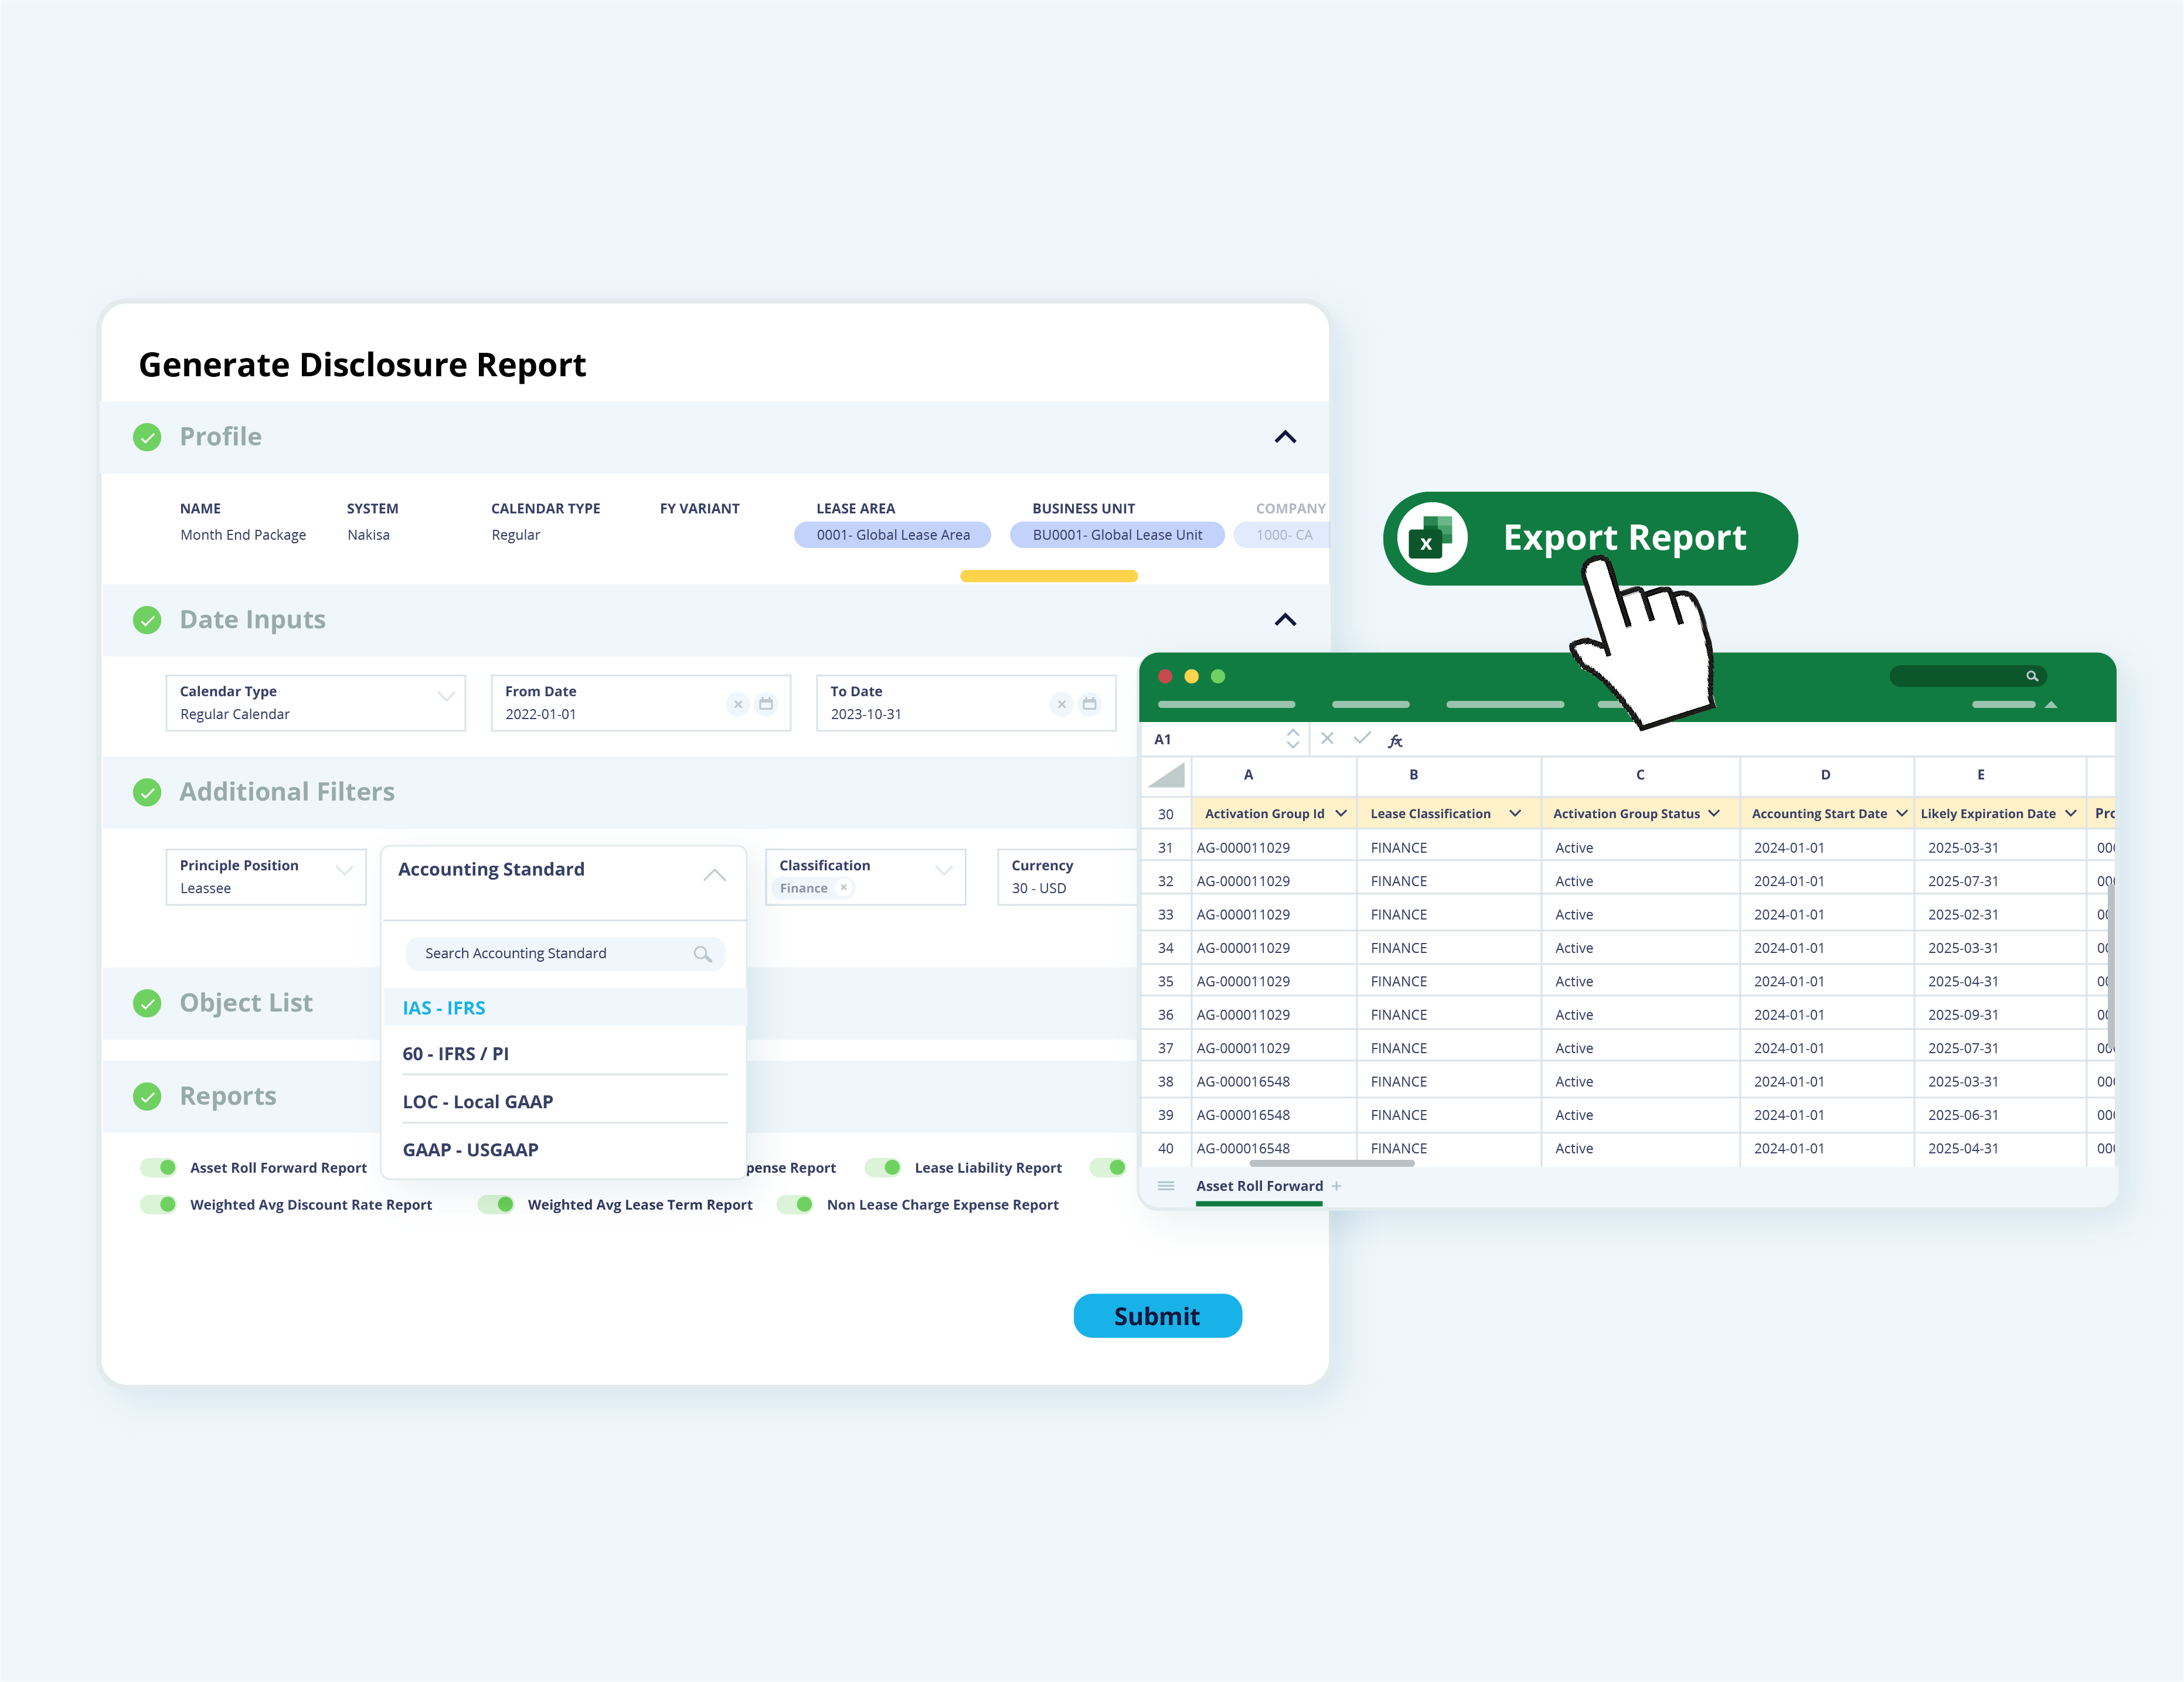 With Nakisa's lease management software, you can benefit from disclosure reporting under multiple standards, 10K/10Q reports, ad-hoc reports to support additional analysis, and highly configurable dashboards.   